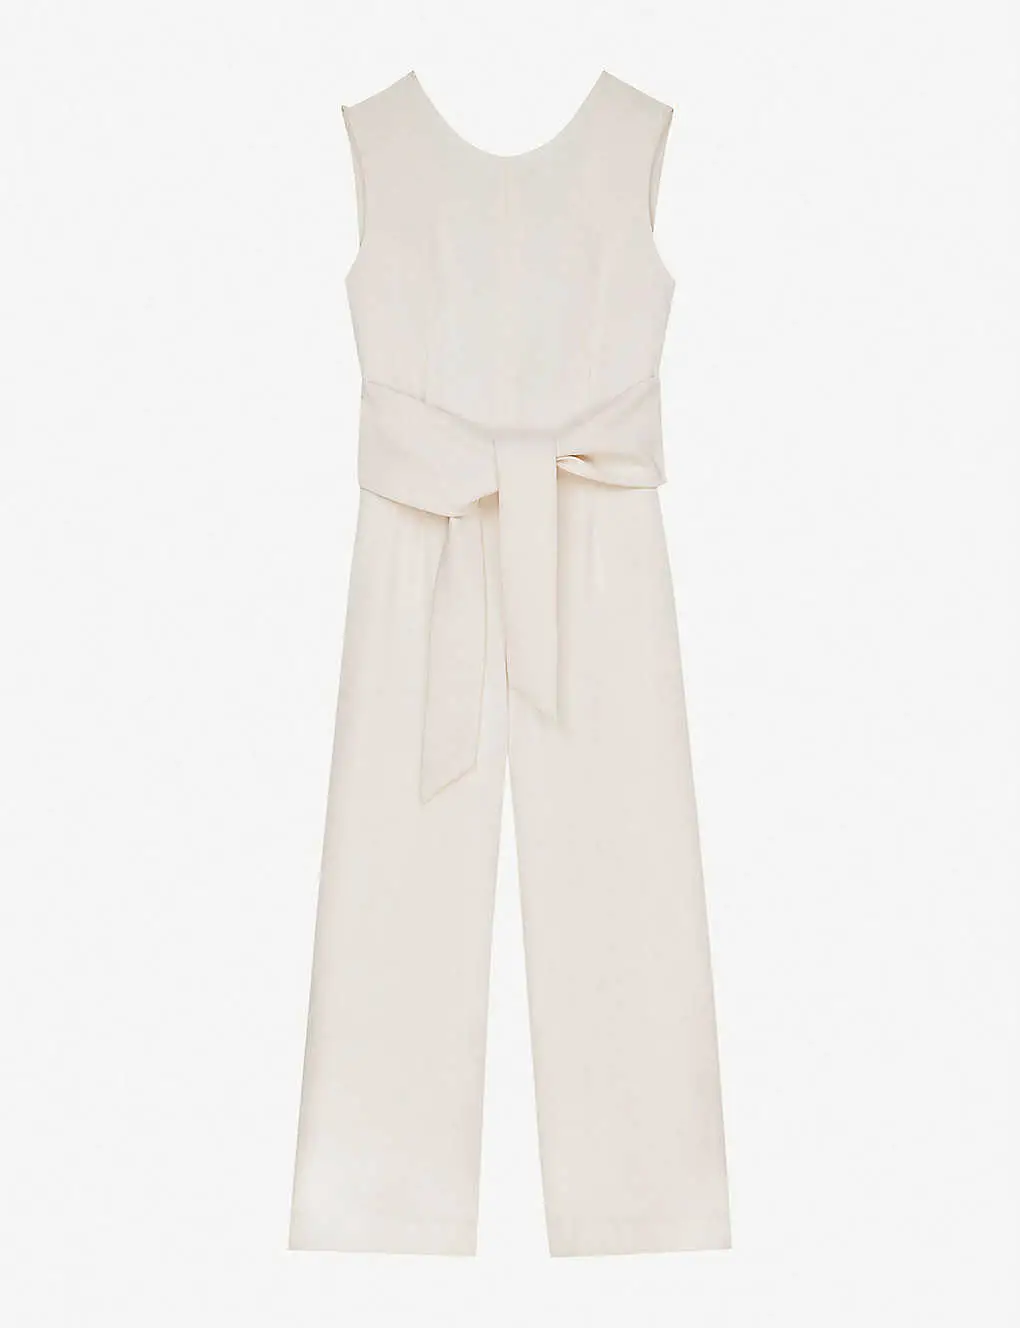 French Fashion Clothing Brand Claudie Pierlot French Jumpsuit Parisian Style Paris Chic Style